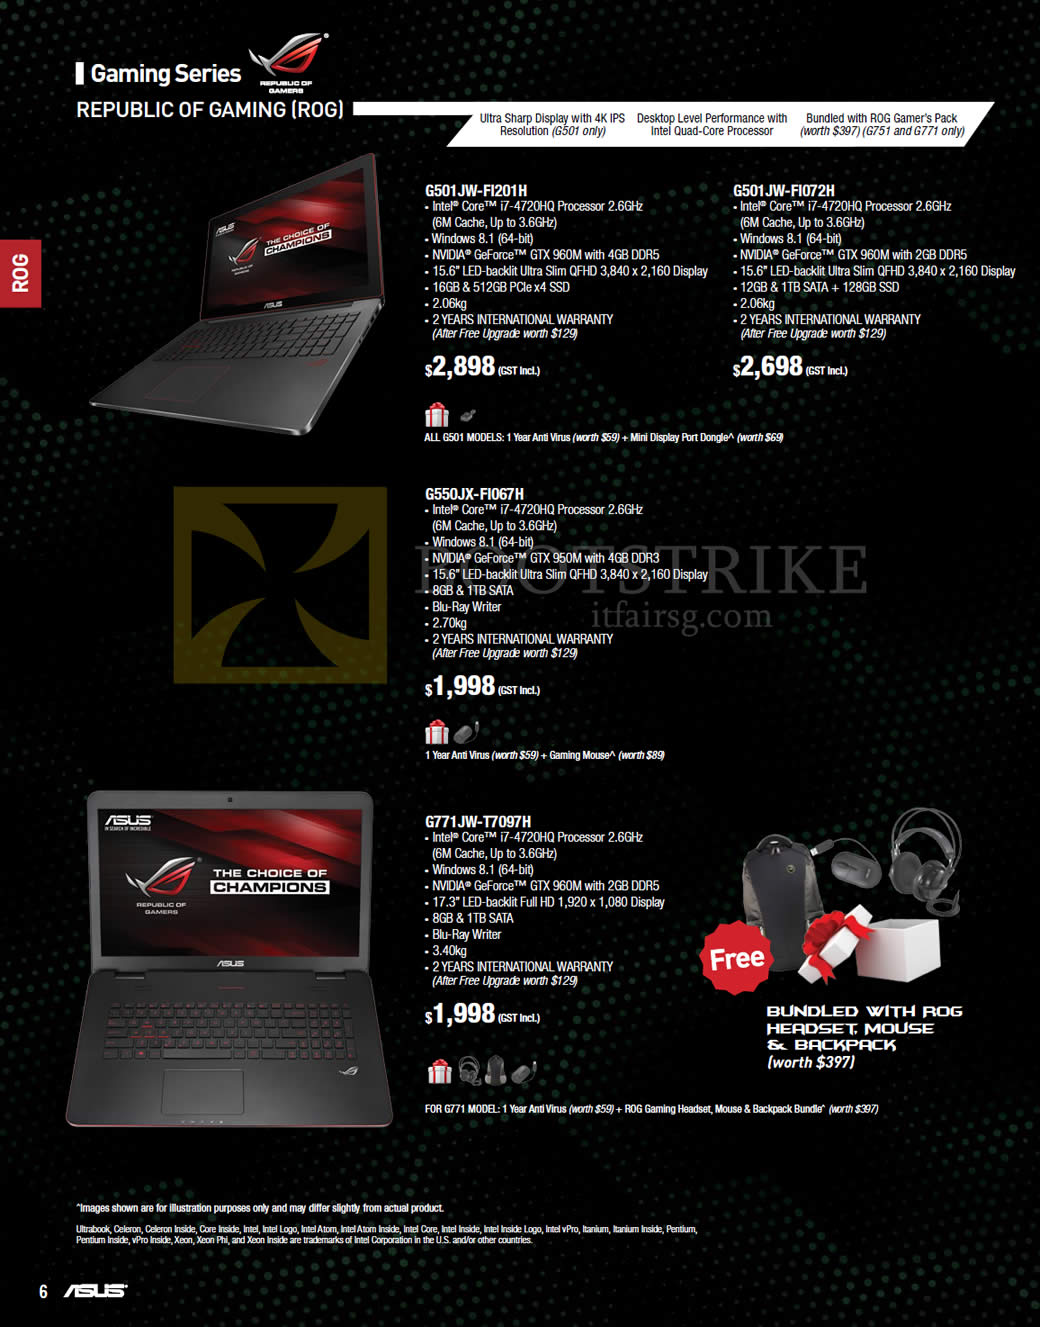 PC SHOW 2015 price list image brochure of ASUS Notebooks, ROG, G501JW-FI201H, G501JW-FI072H, G550JX-FI067H, G771JW-T7097H